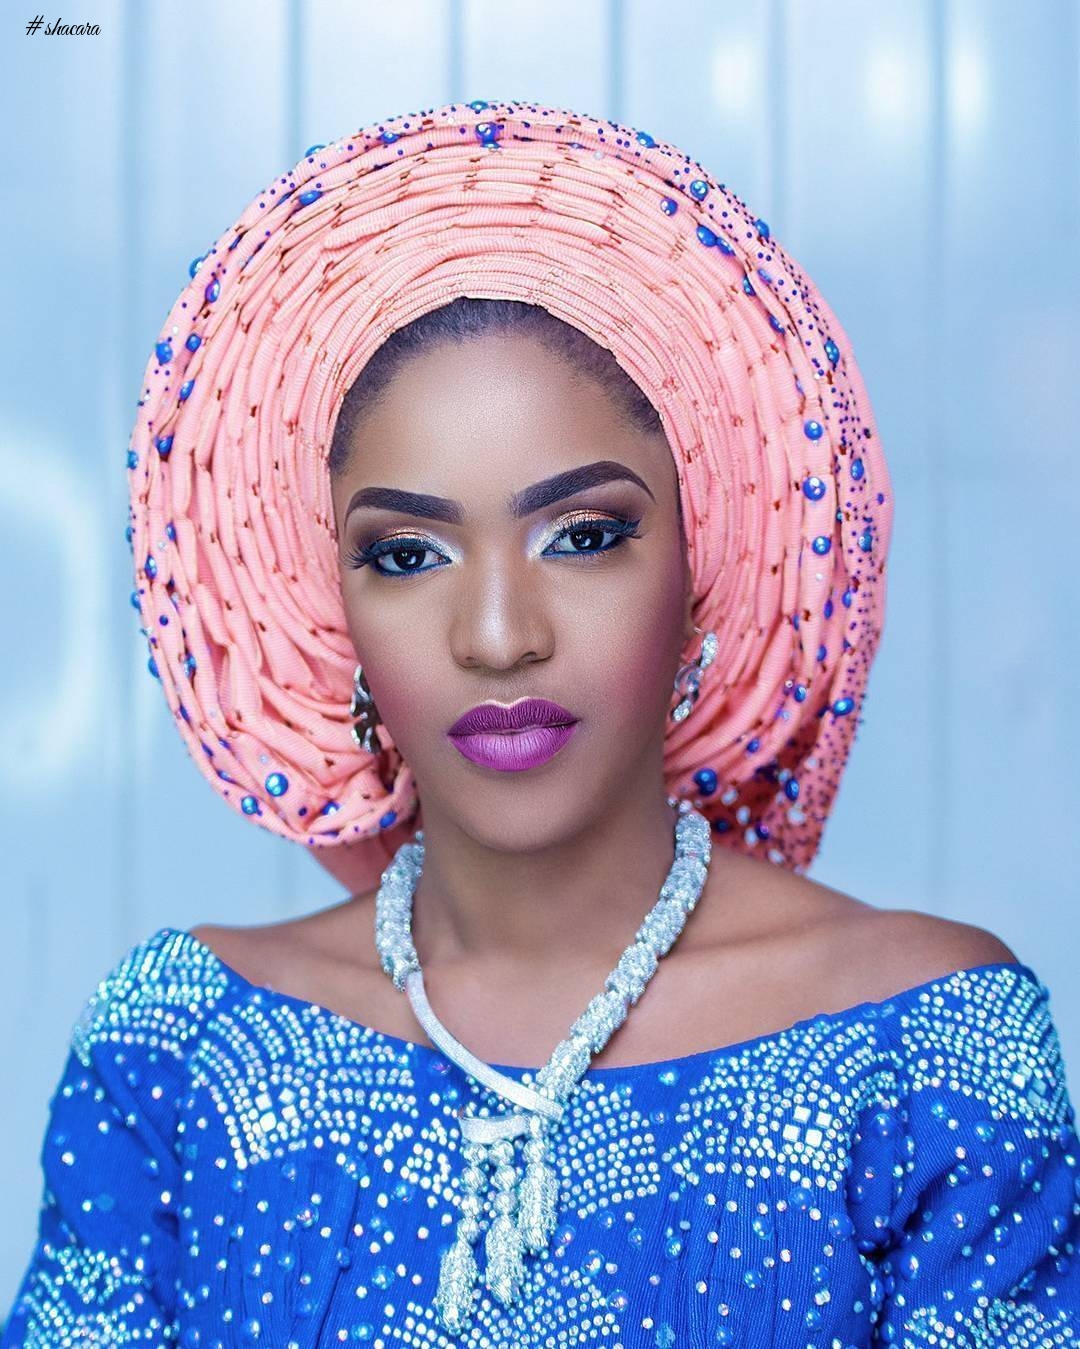 GELE AND TURBAN STYLE INSPIRATION